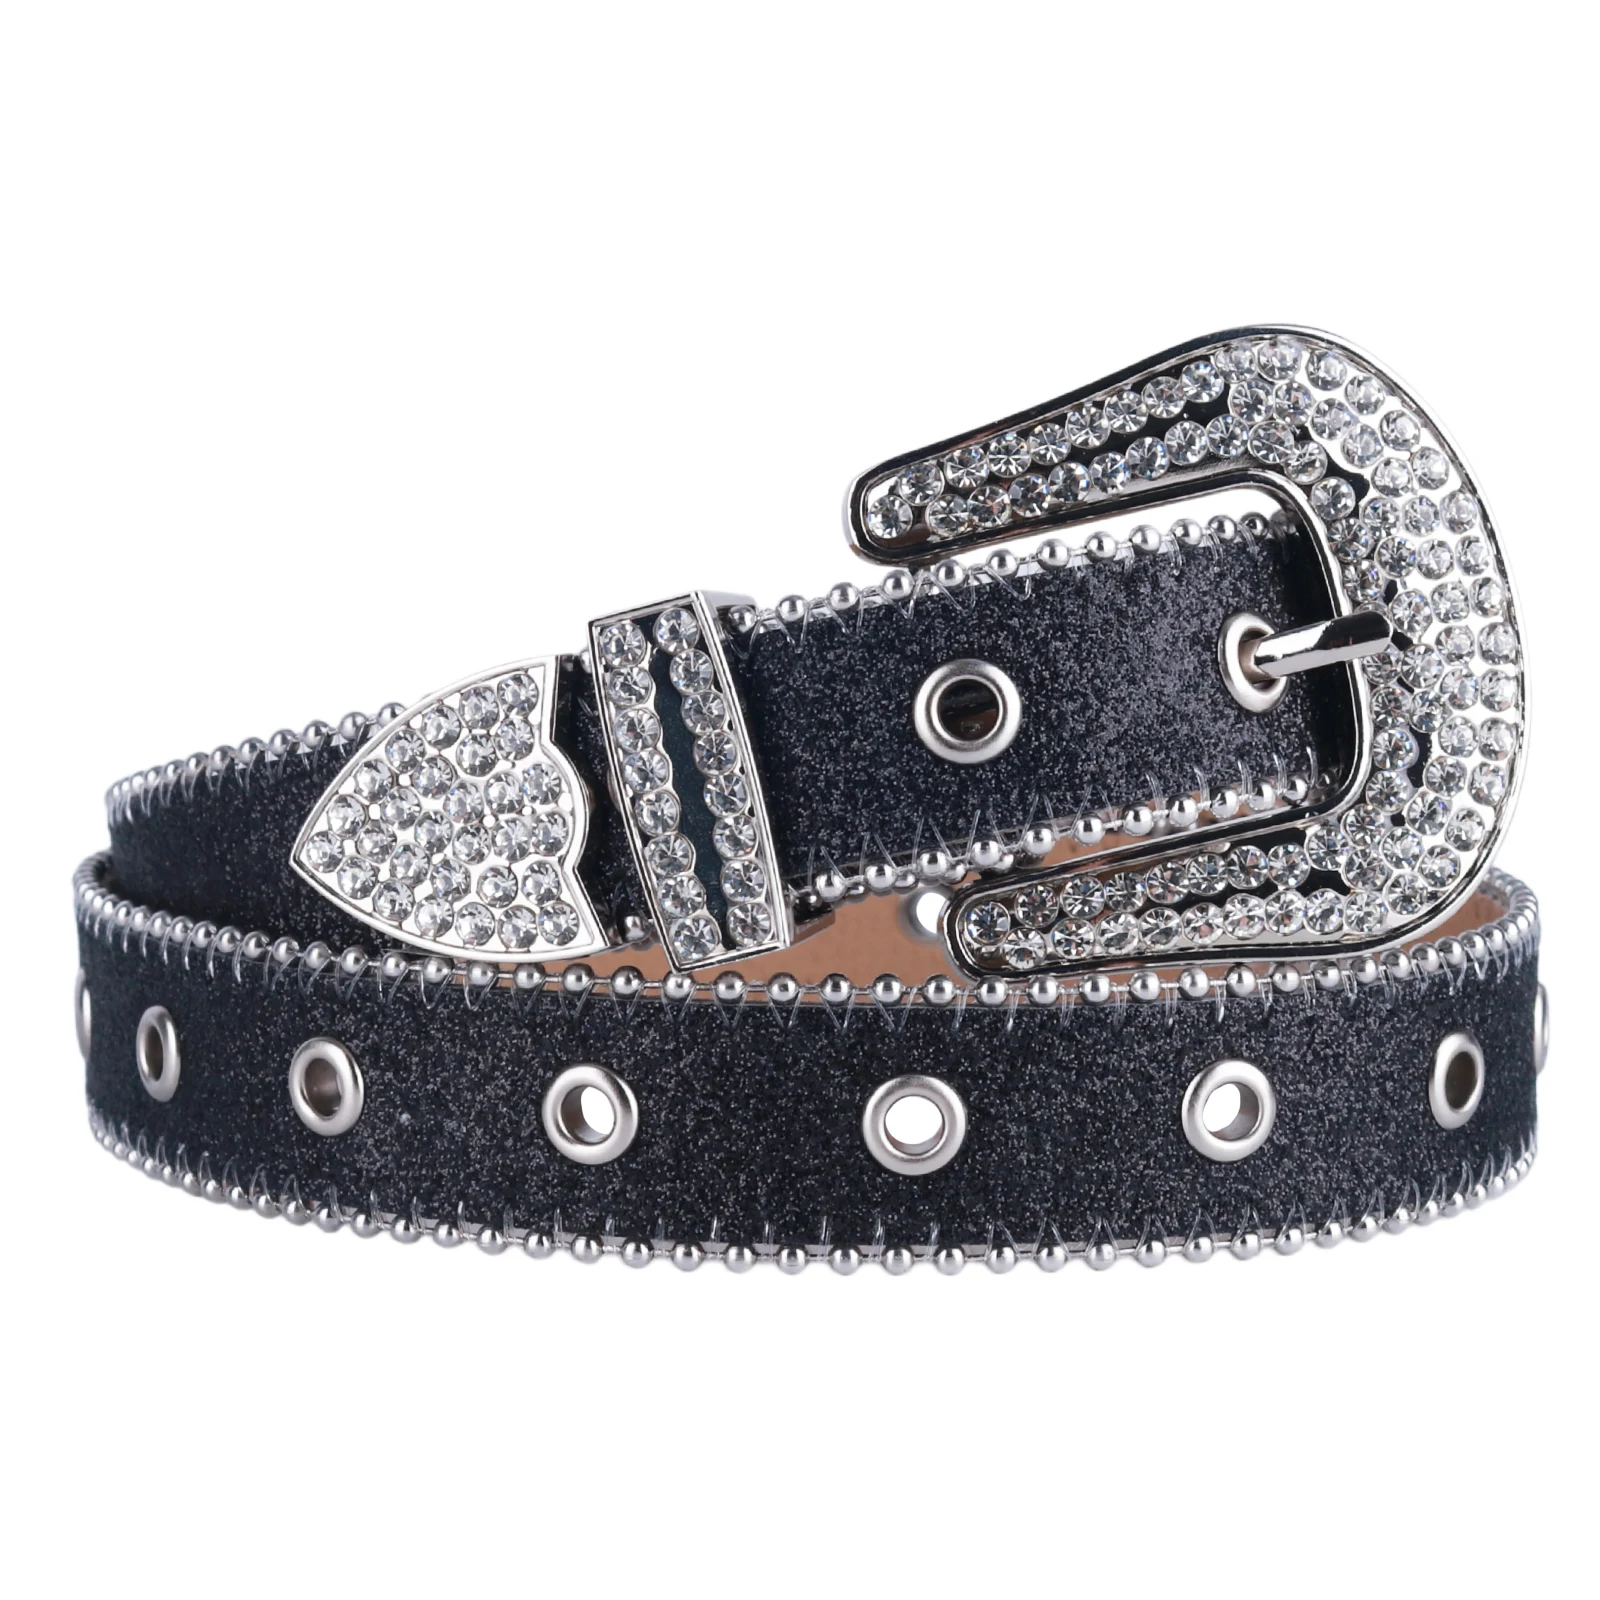 Western Punk Cowboy Cowgirl Rhinestones Belts For Women Man High Quality Bling Bling Diamond Crystal Studded Belt For Jeans